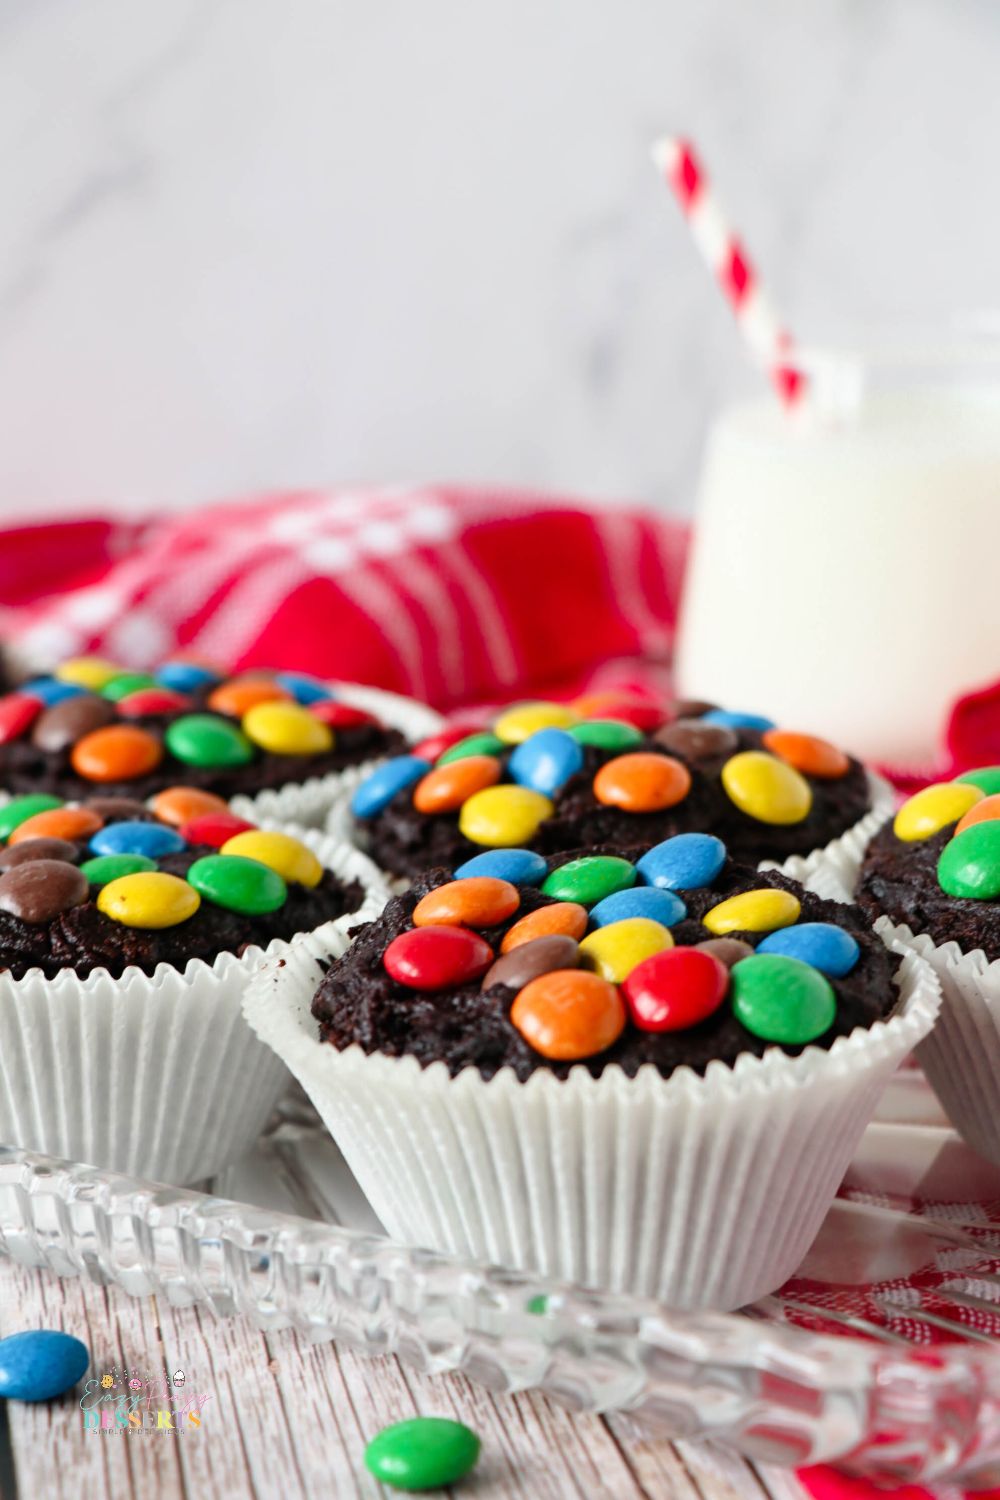 Image of M&M cupcakes with chocolate frosting